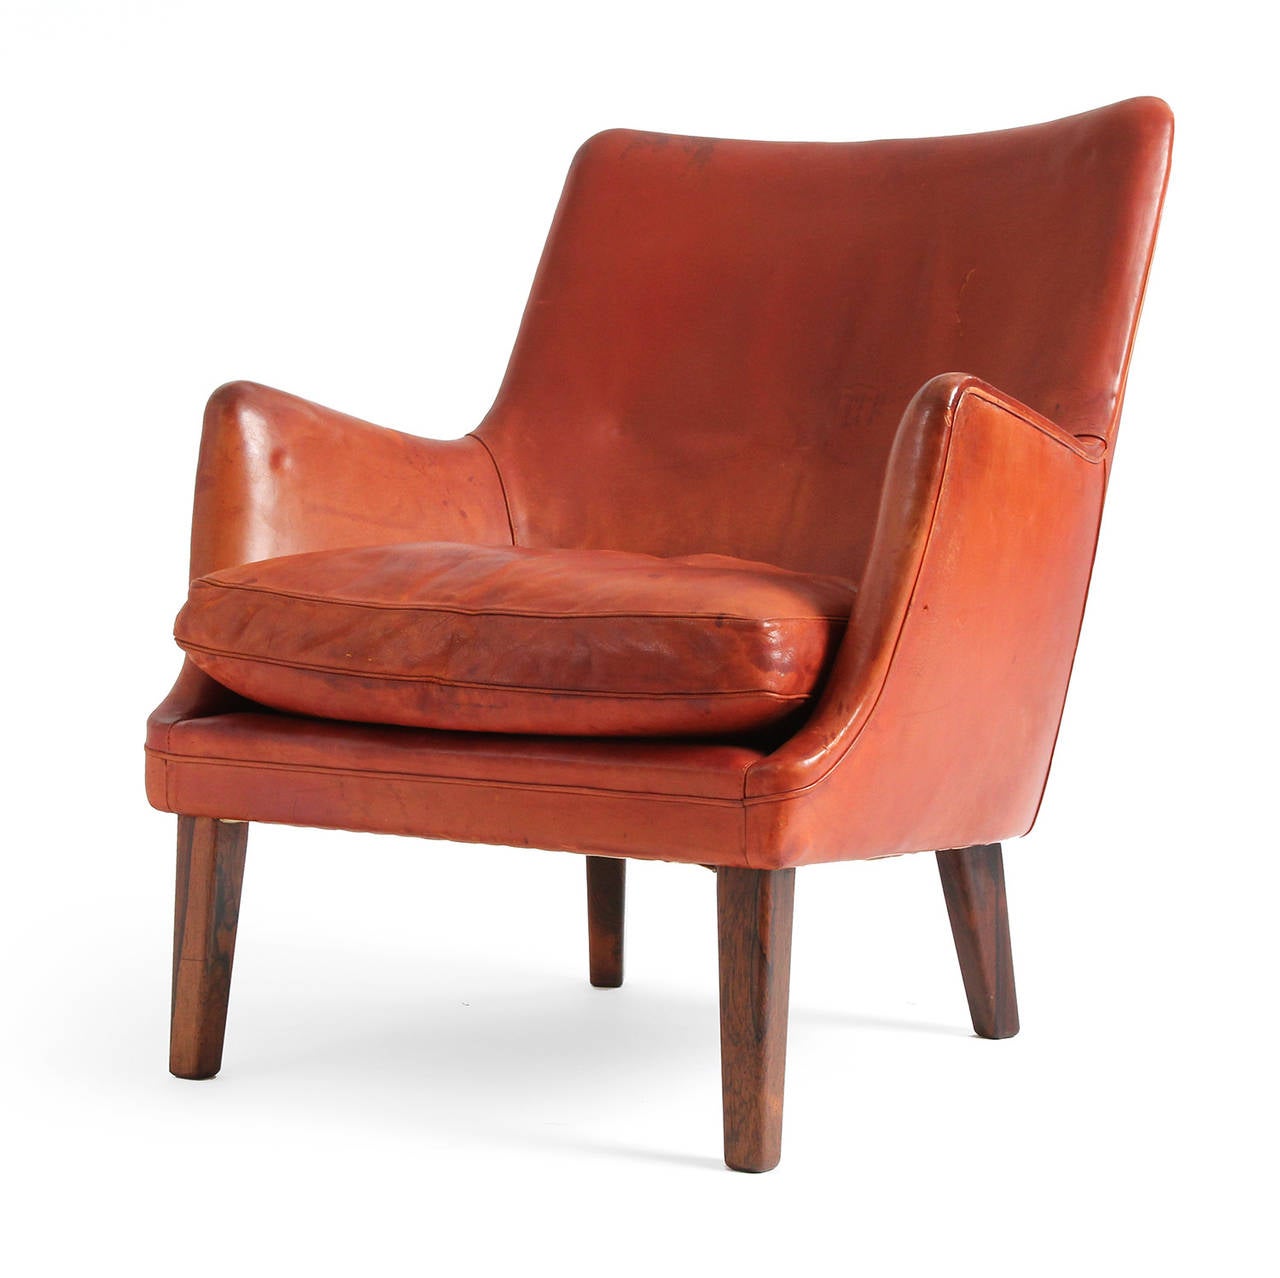 Mid-20th Century Lounge Chair by Arne Vodder